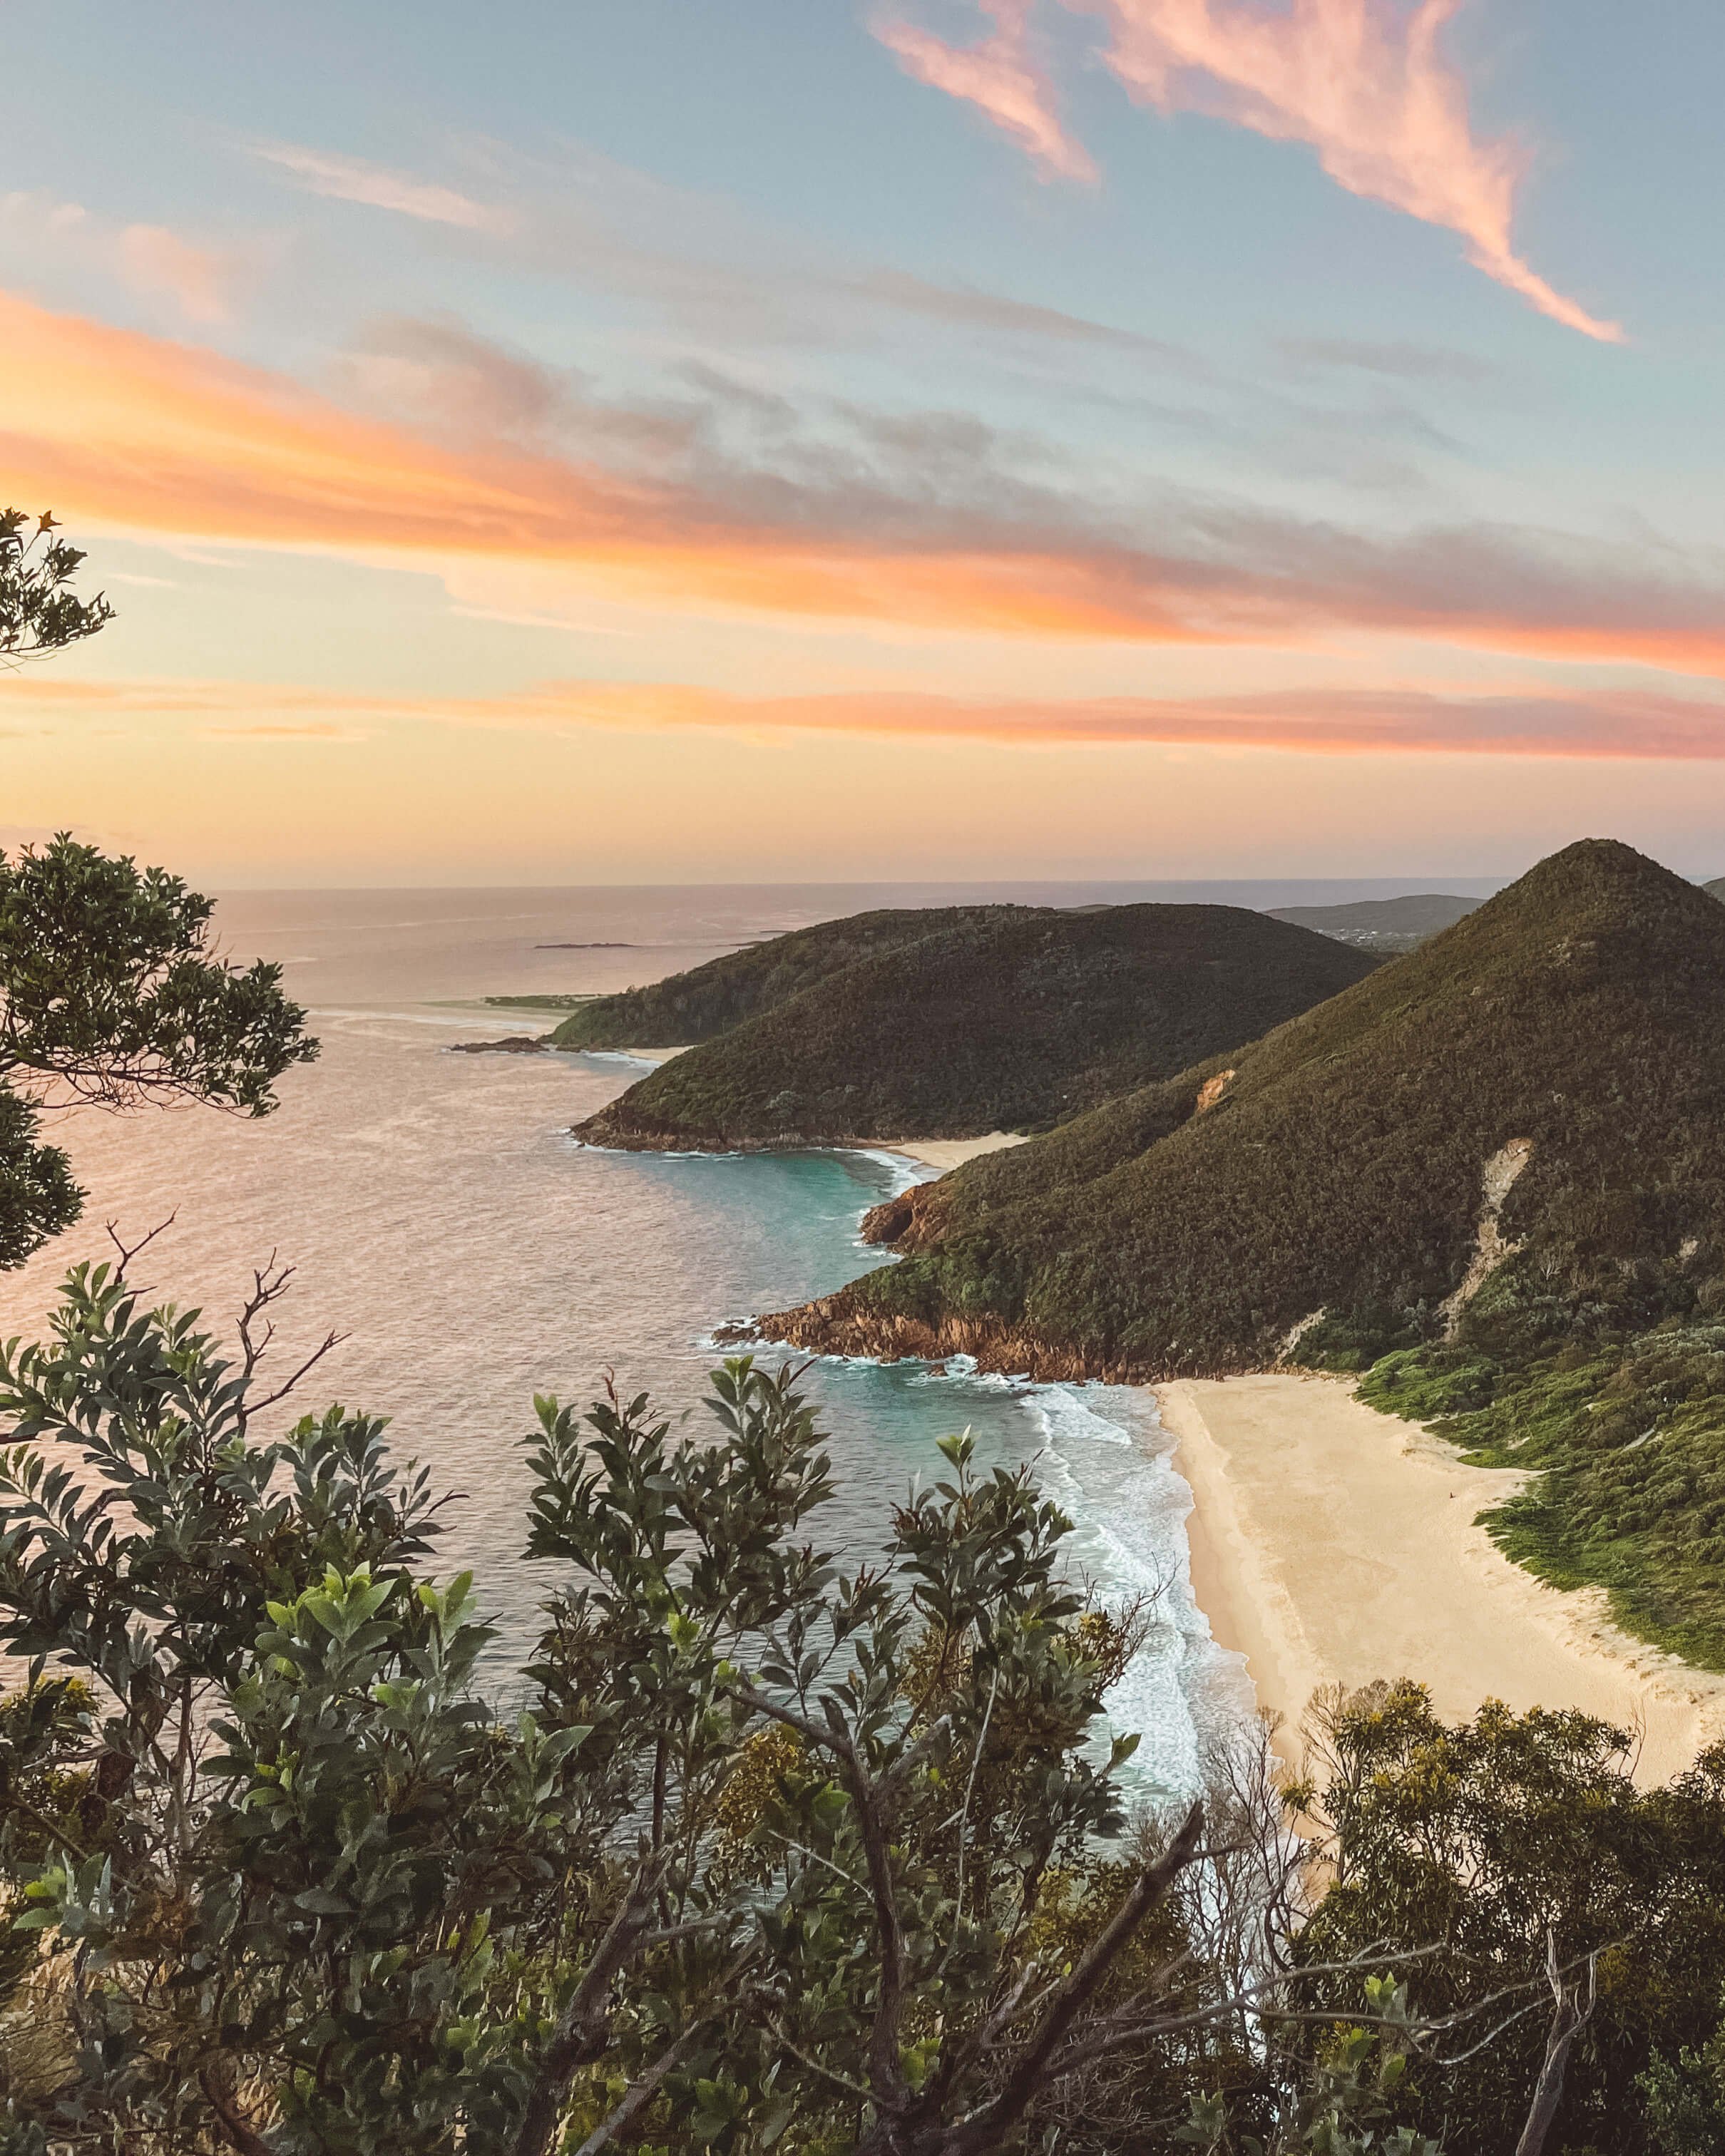 Shades of pink at sunrise - Mount Tomaree - Port Stephens - New South Wales (NSW) - Australia